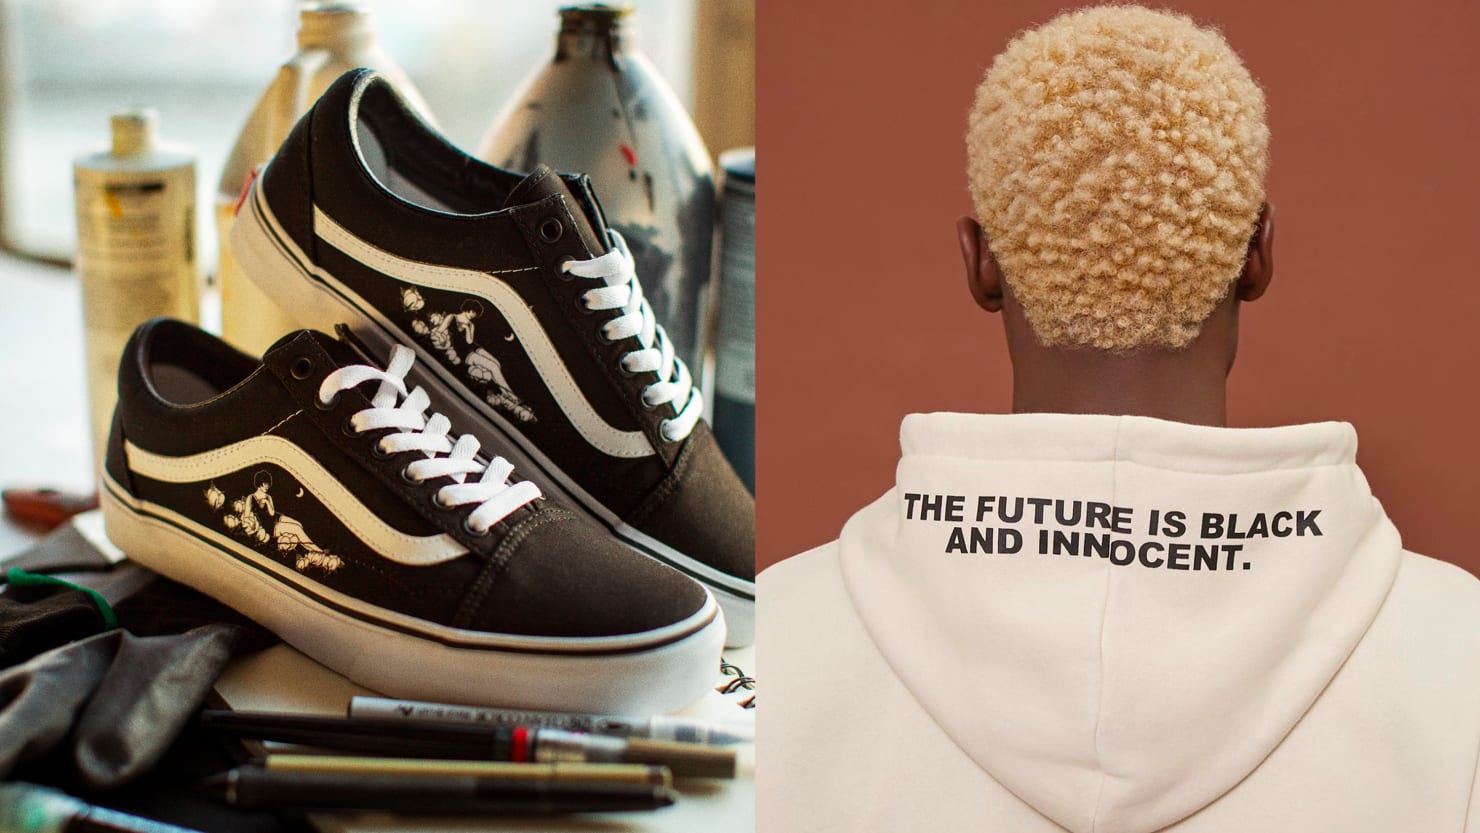 Black Artists Make Fashion a Profitable New Canvas. But Is Their Work Being Exploited?